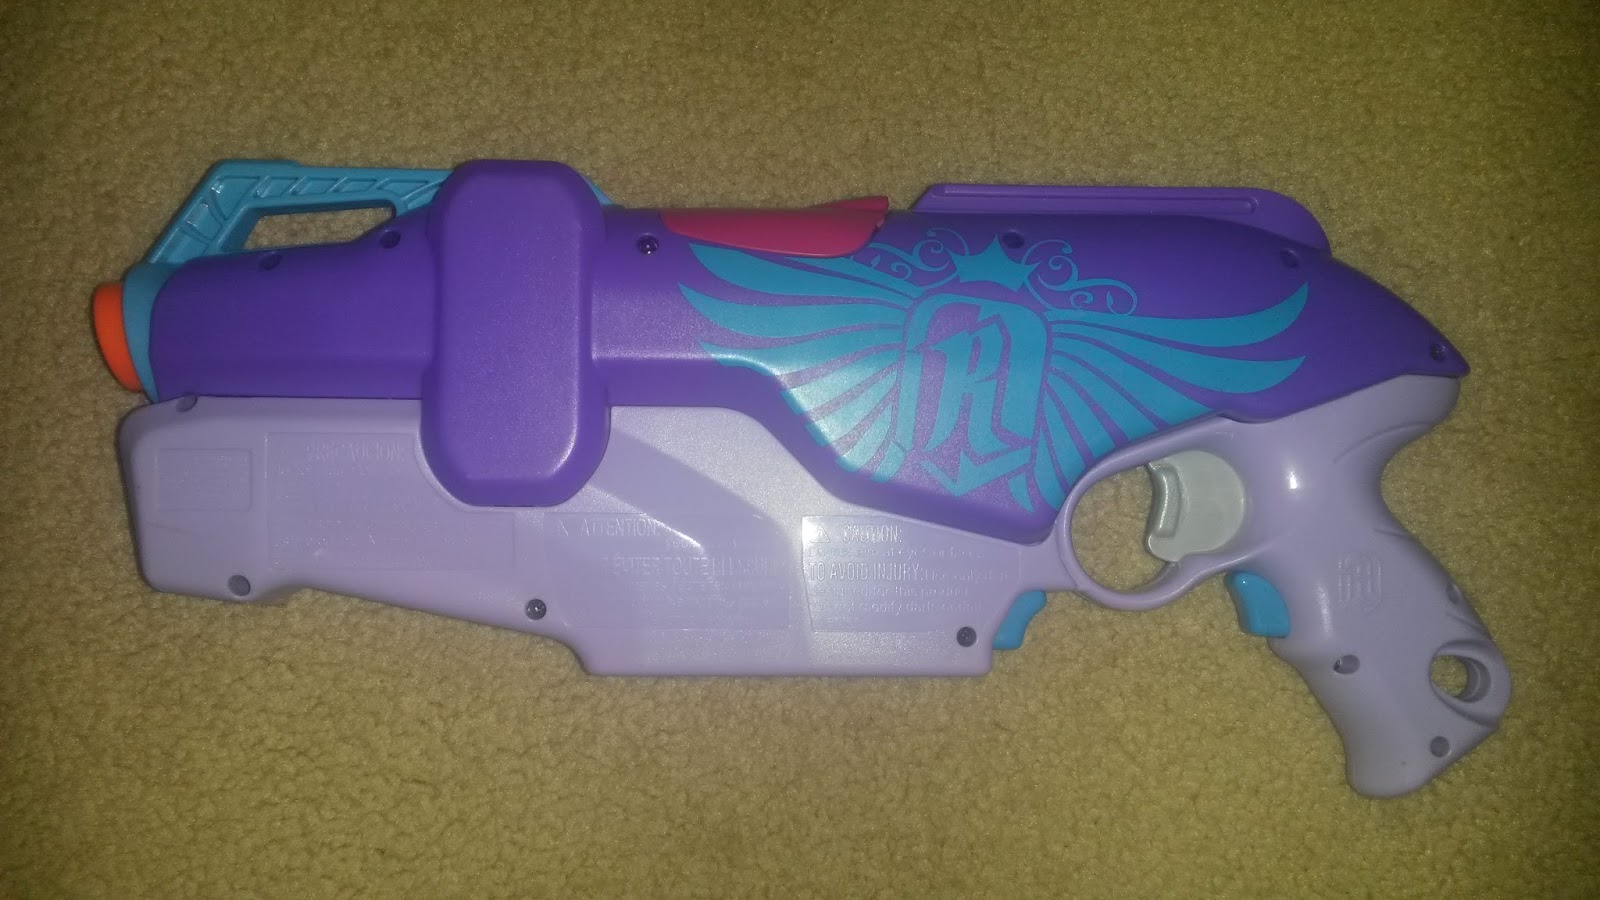 REVIEW] Nerf Rebelle Rapid Red Blaster Unboxing, Review, & Firing Test 